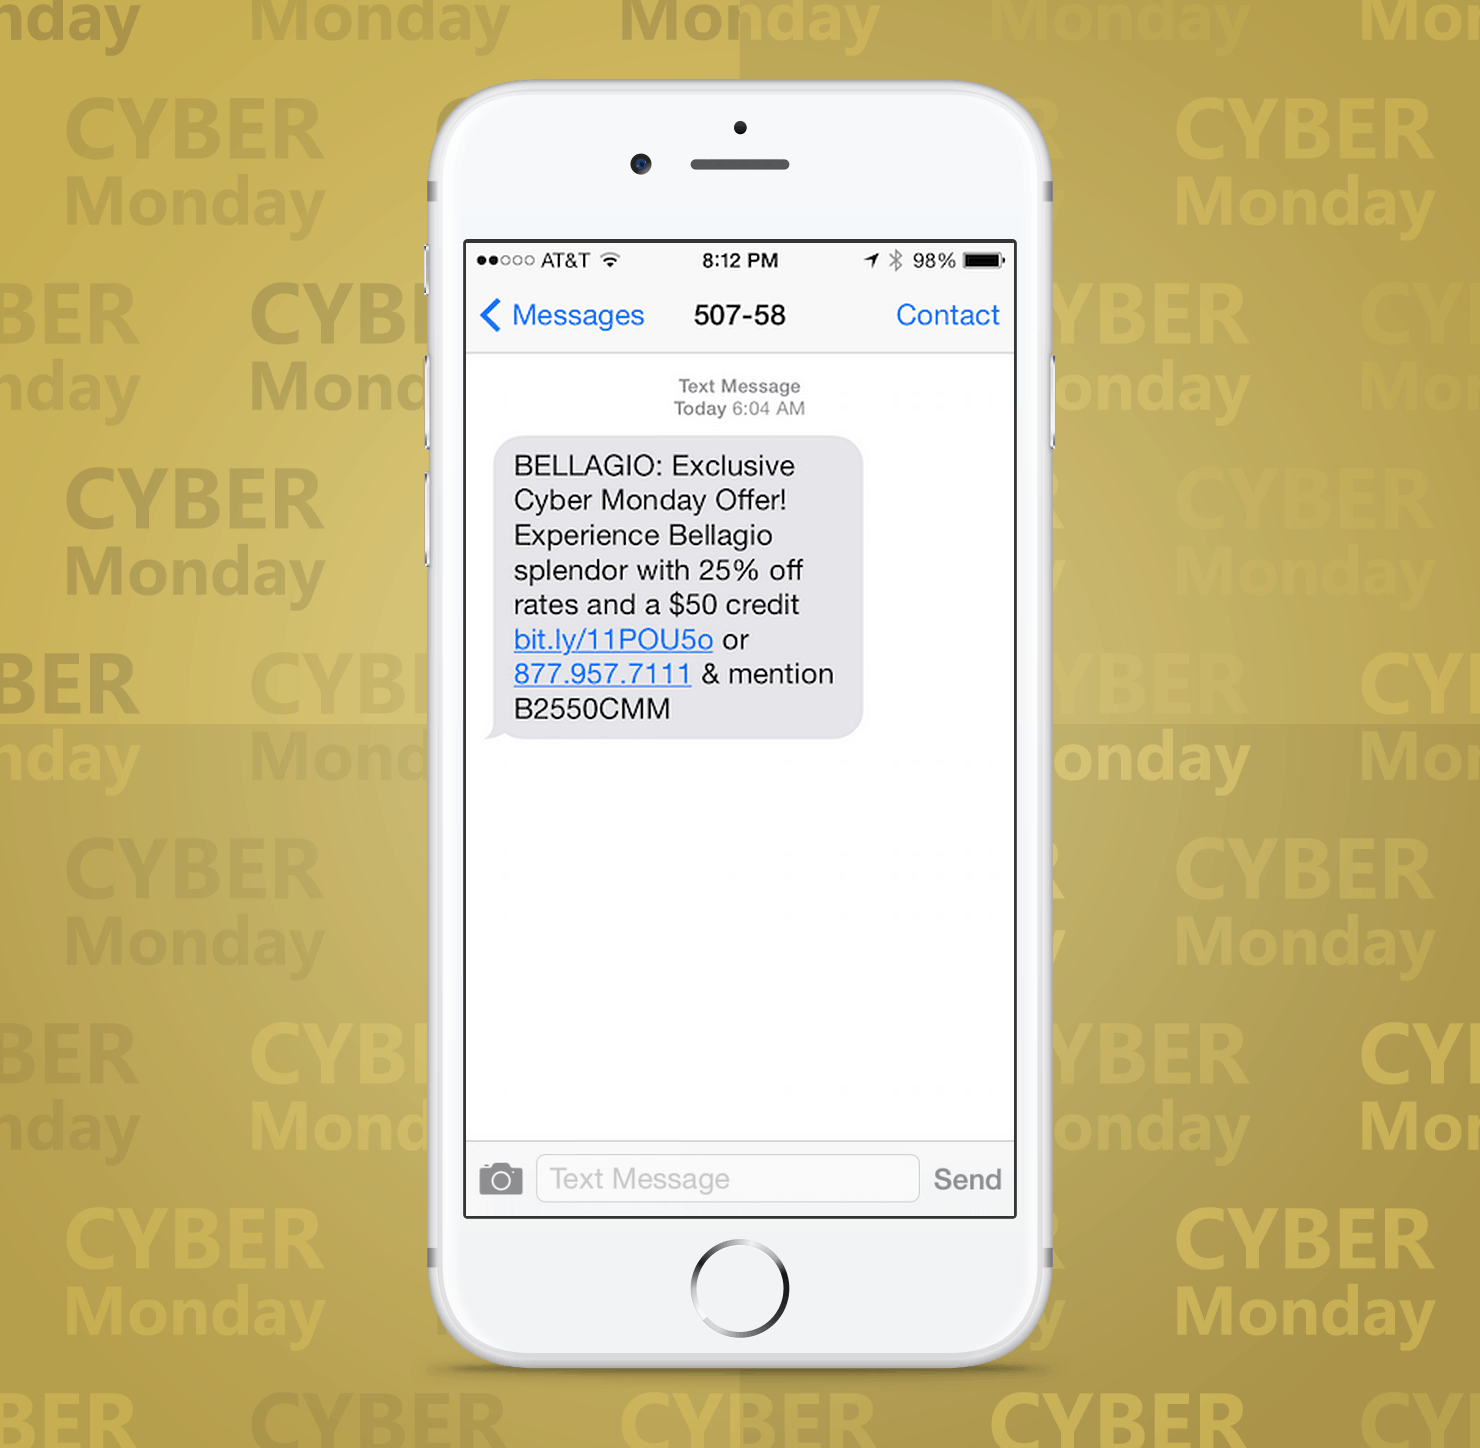 SMS Coupon Example Sent on Cyber Monday From Bellagio Hotel and Casino to Customers